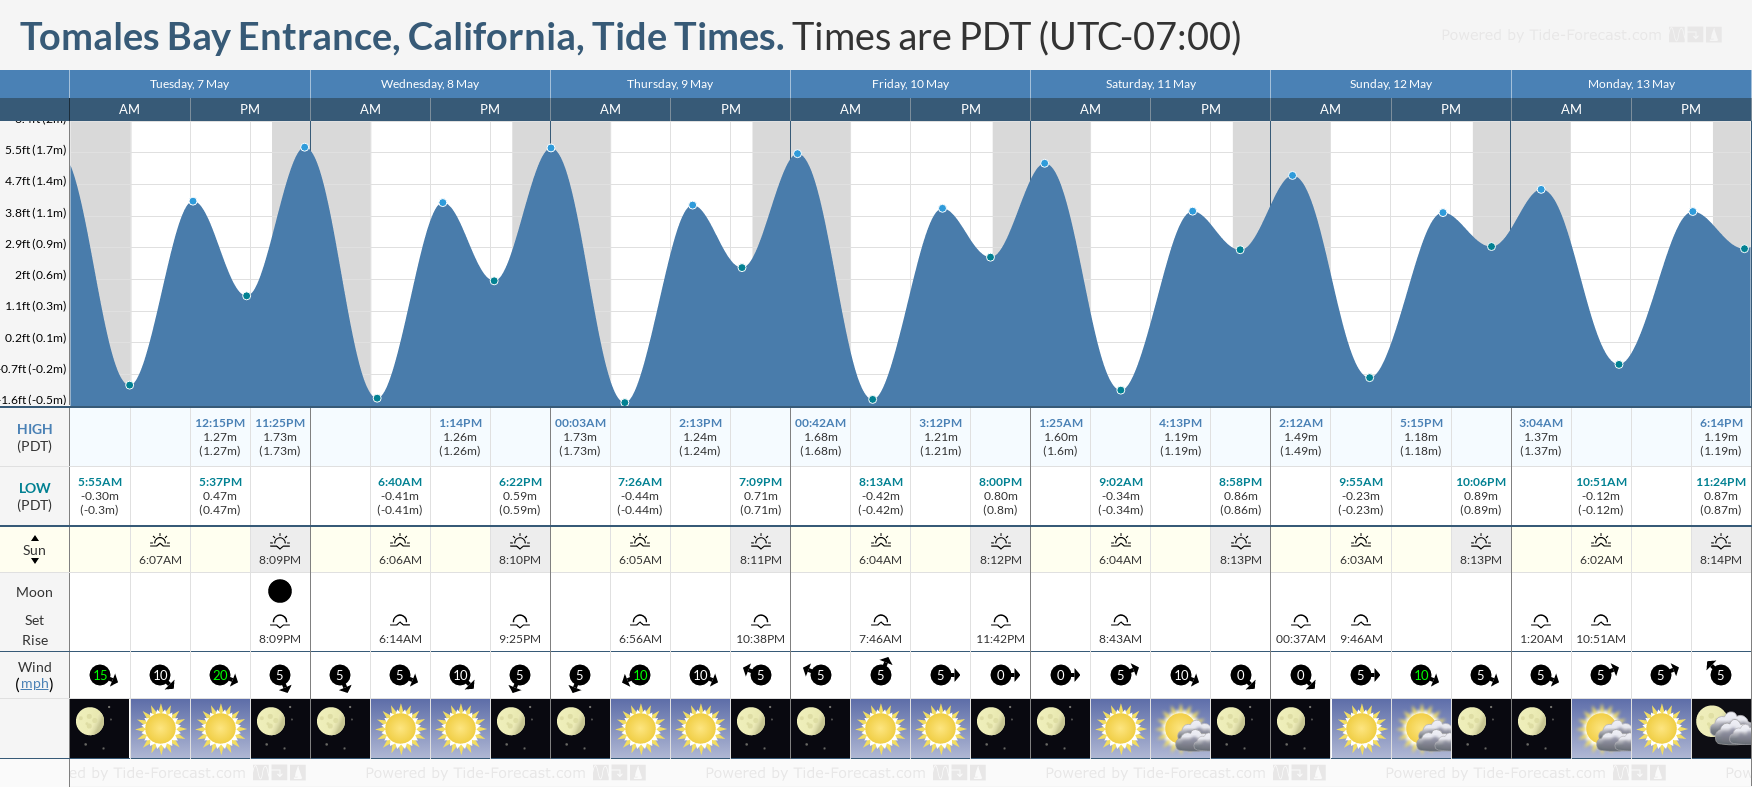 Tomales Bay Entrance, California Tide Chart including high and low tide tide times for the next 7 days